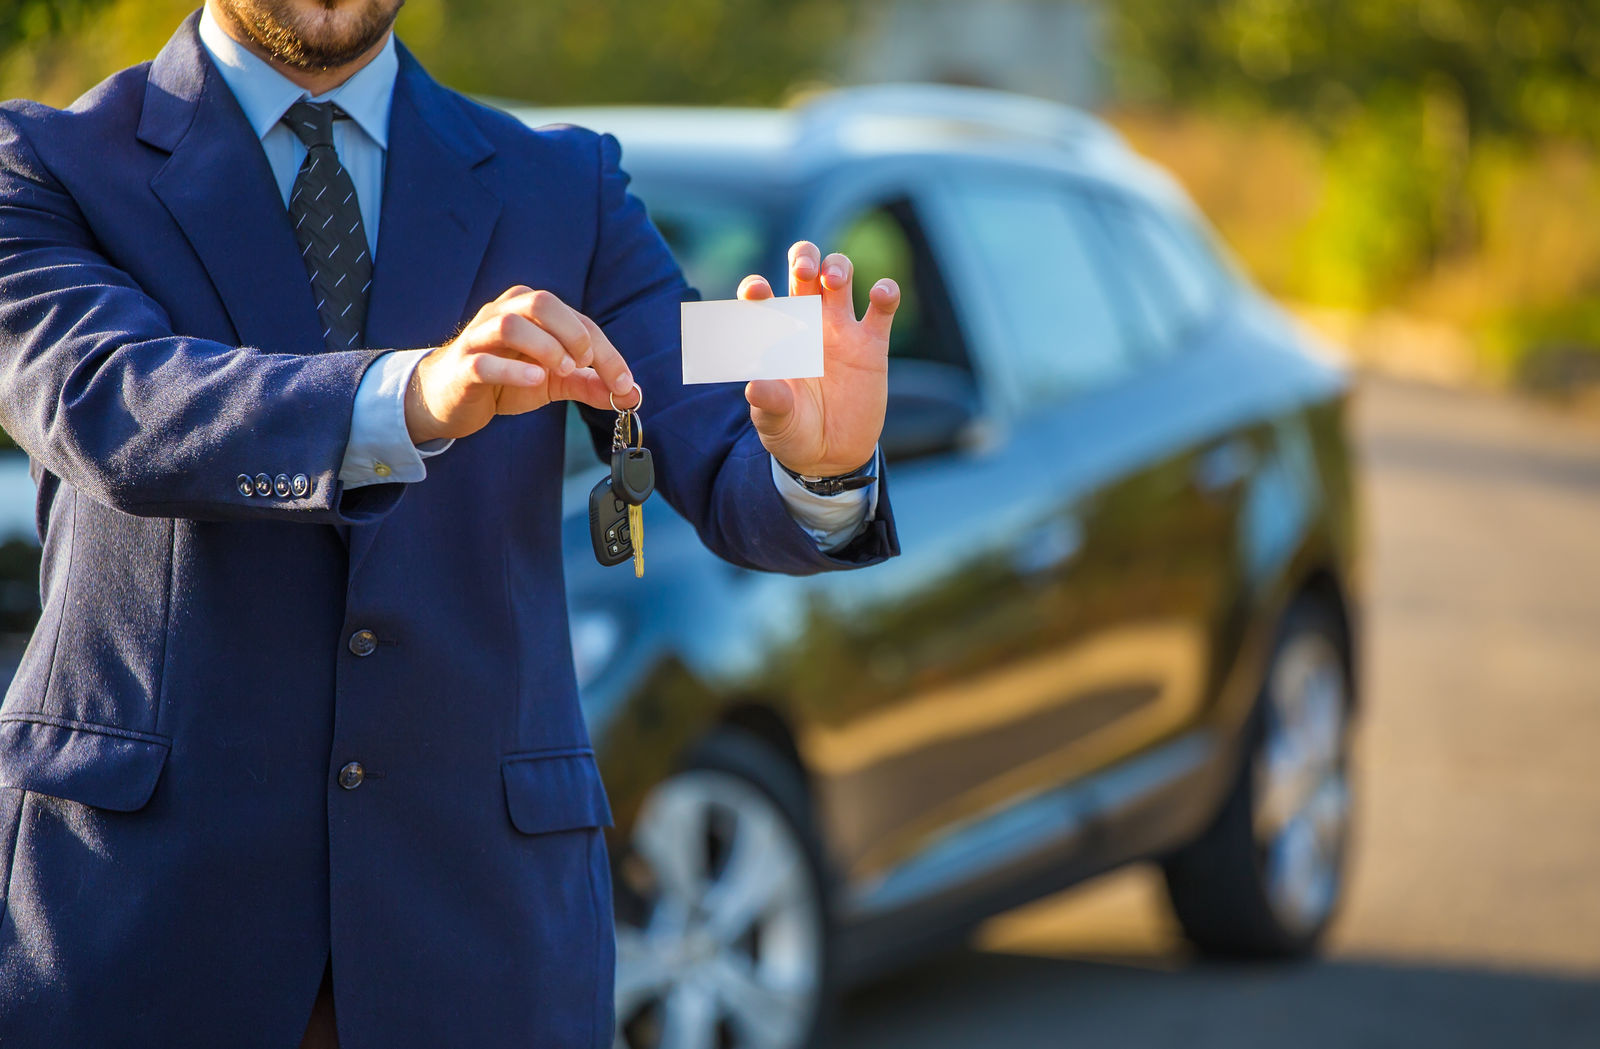 Is it legal to drive without car insurance?